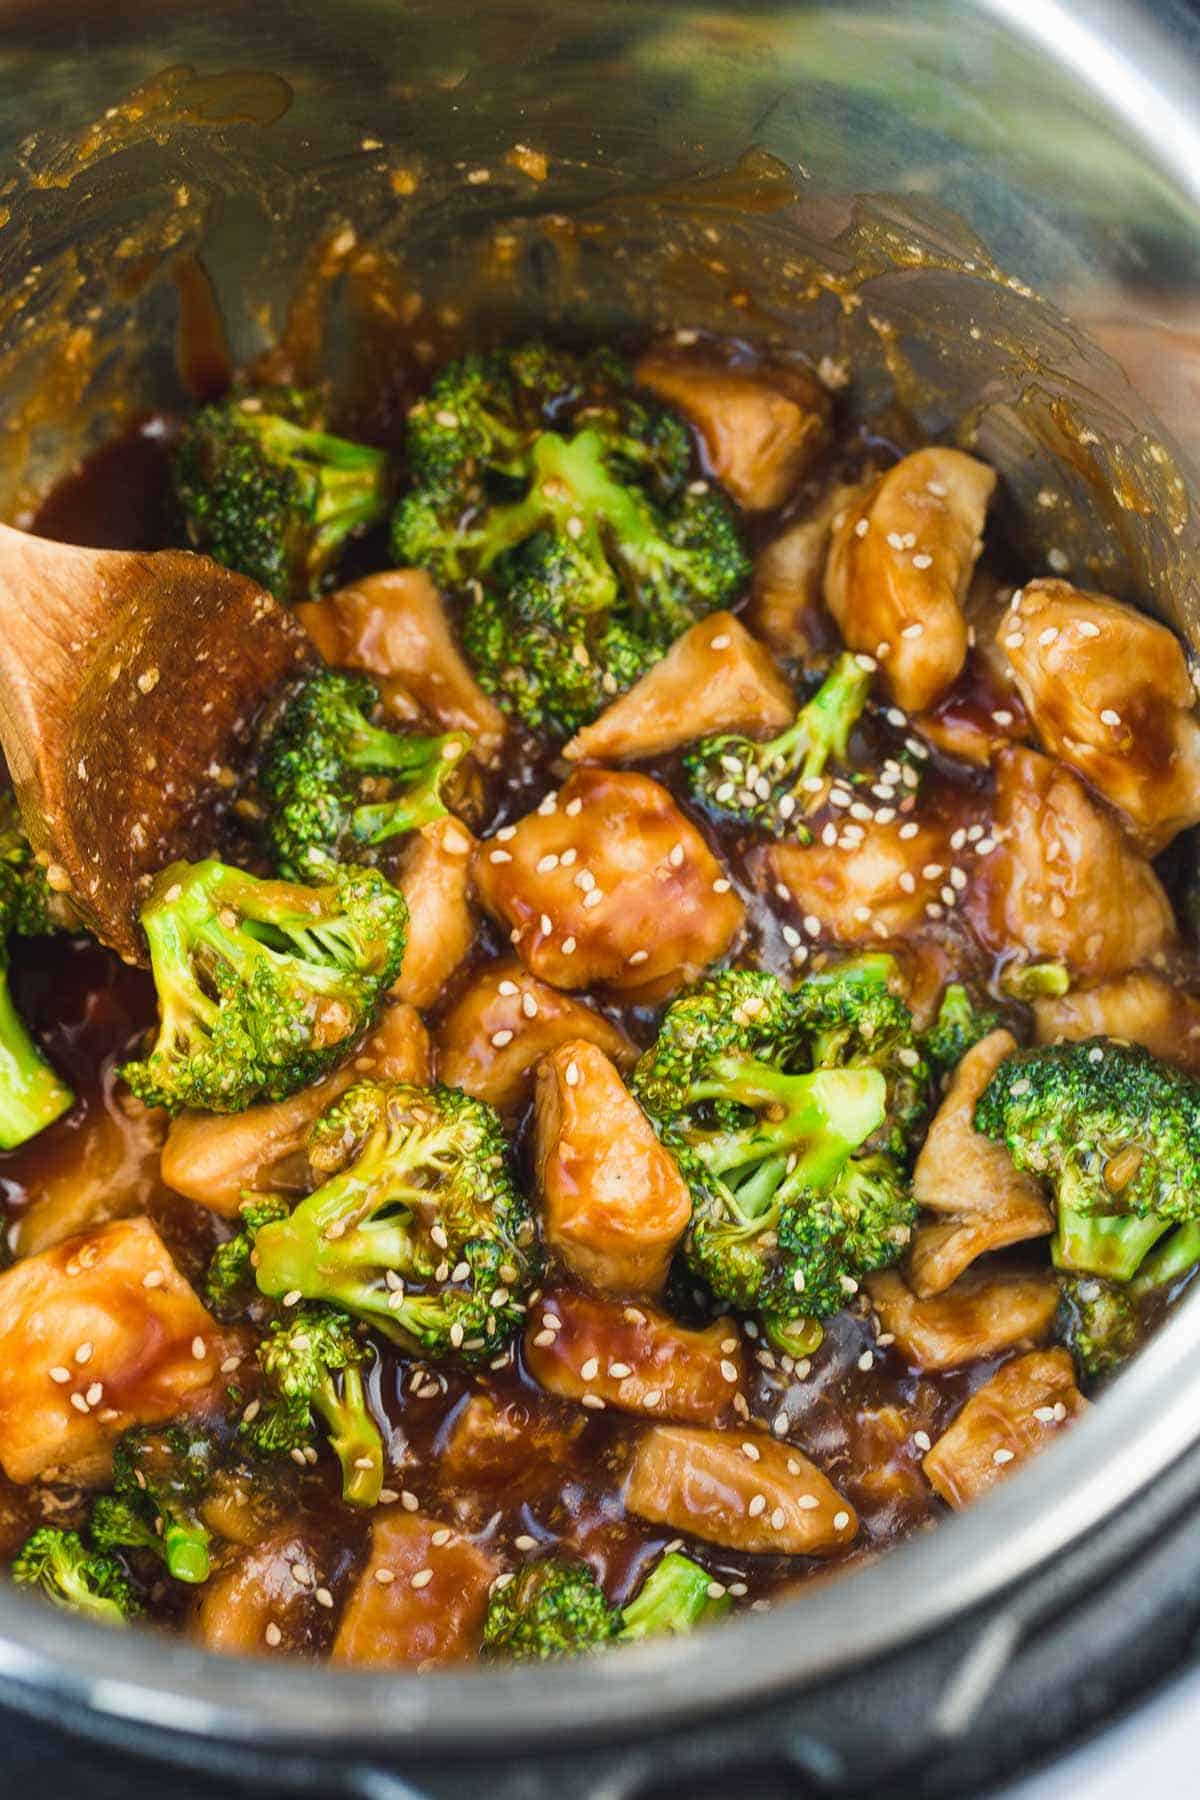 Instant Pot Chicken And Broccoli